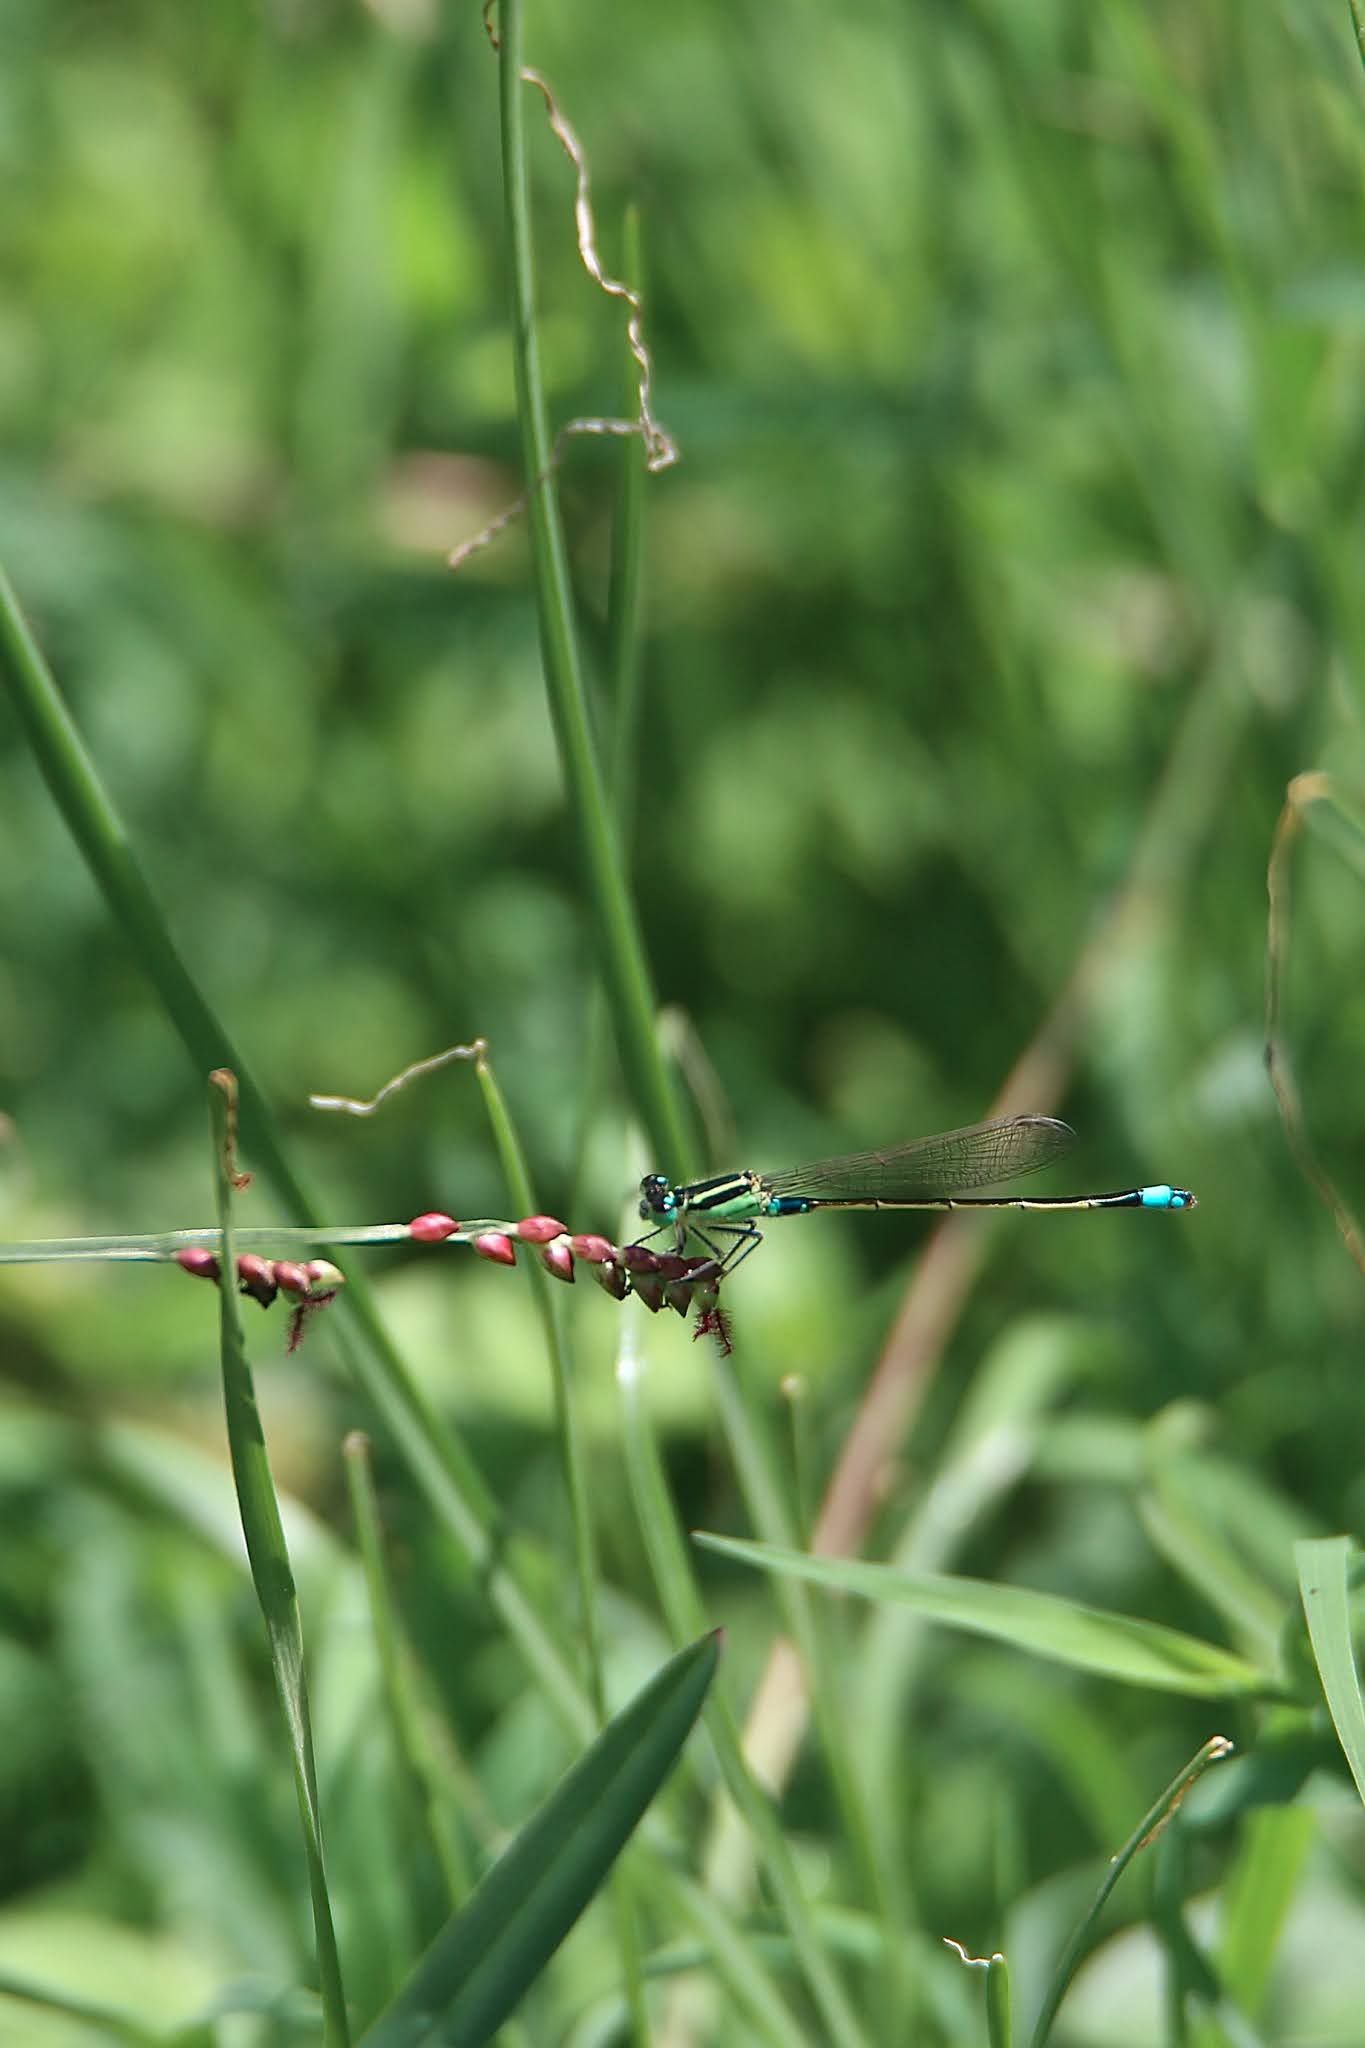 Blue-tailed damselfly, dragonfly high resolution free